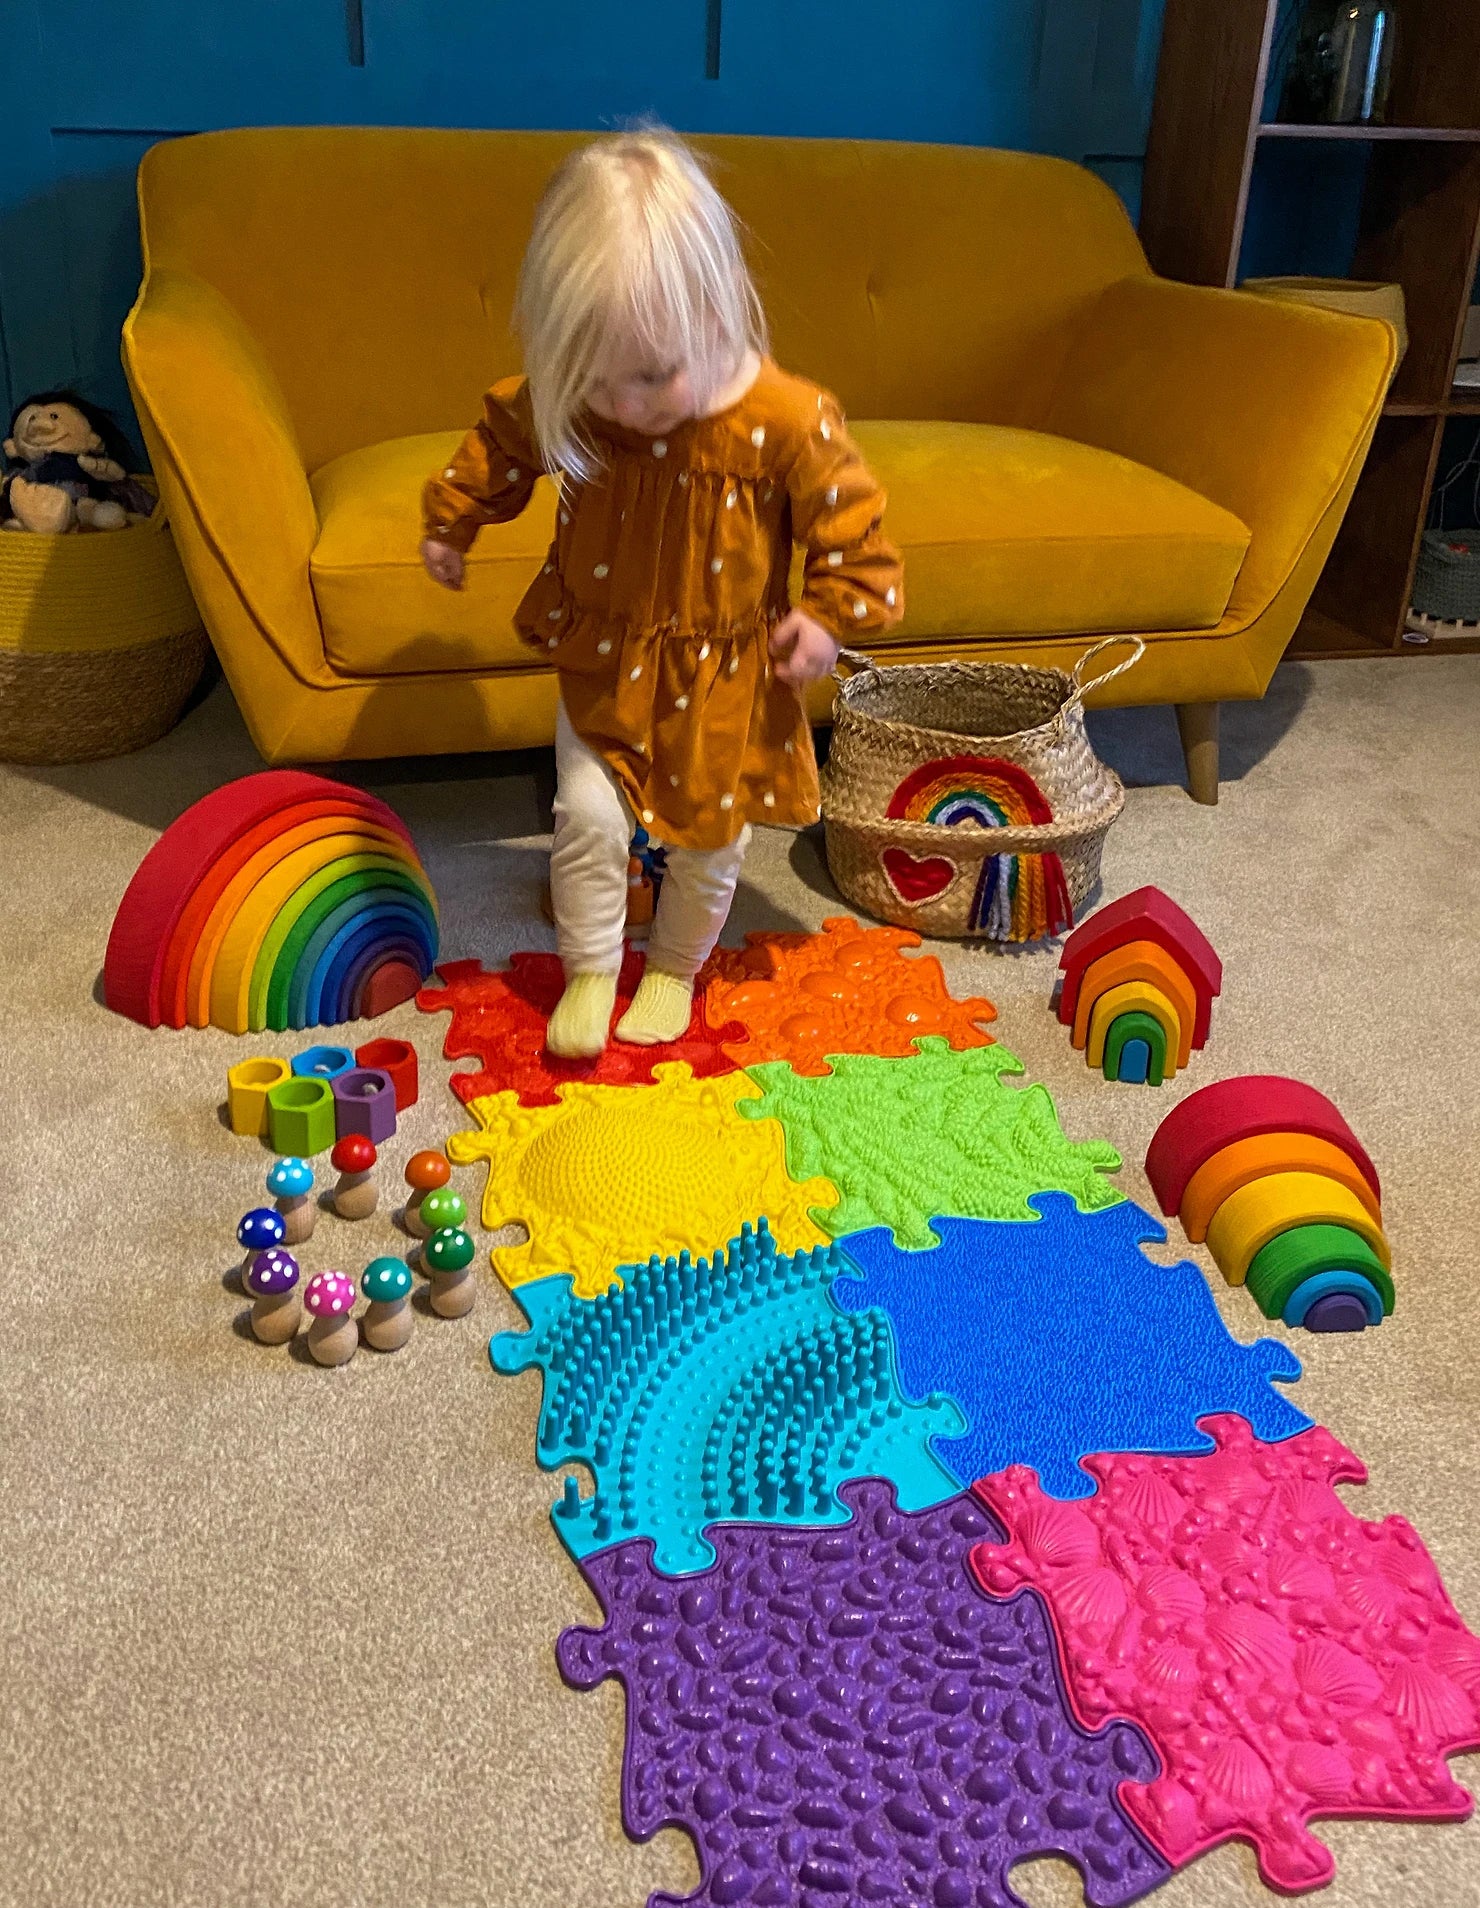 Who are Muffik sensory play mats for?